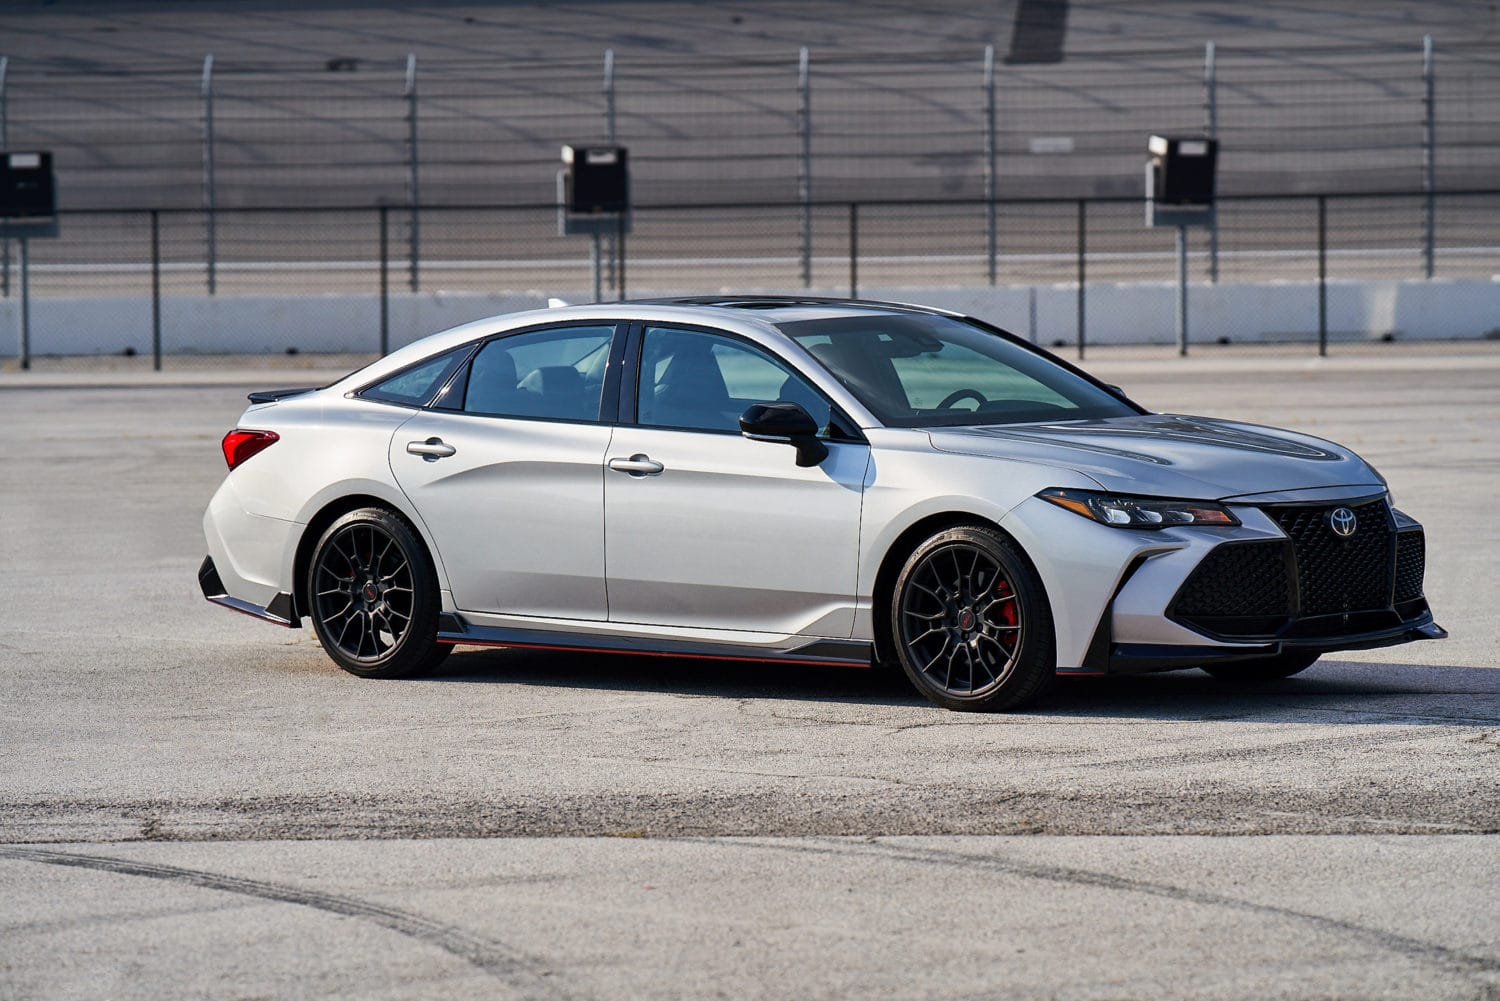 Toyota TRD Goes Upscale in 2020 Avalon Focus Daily News